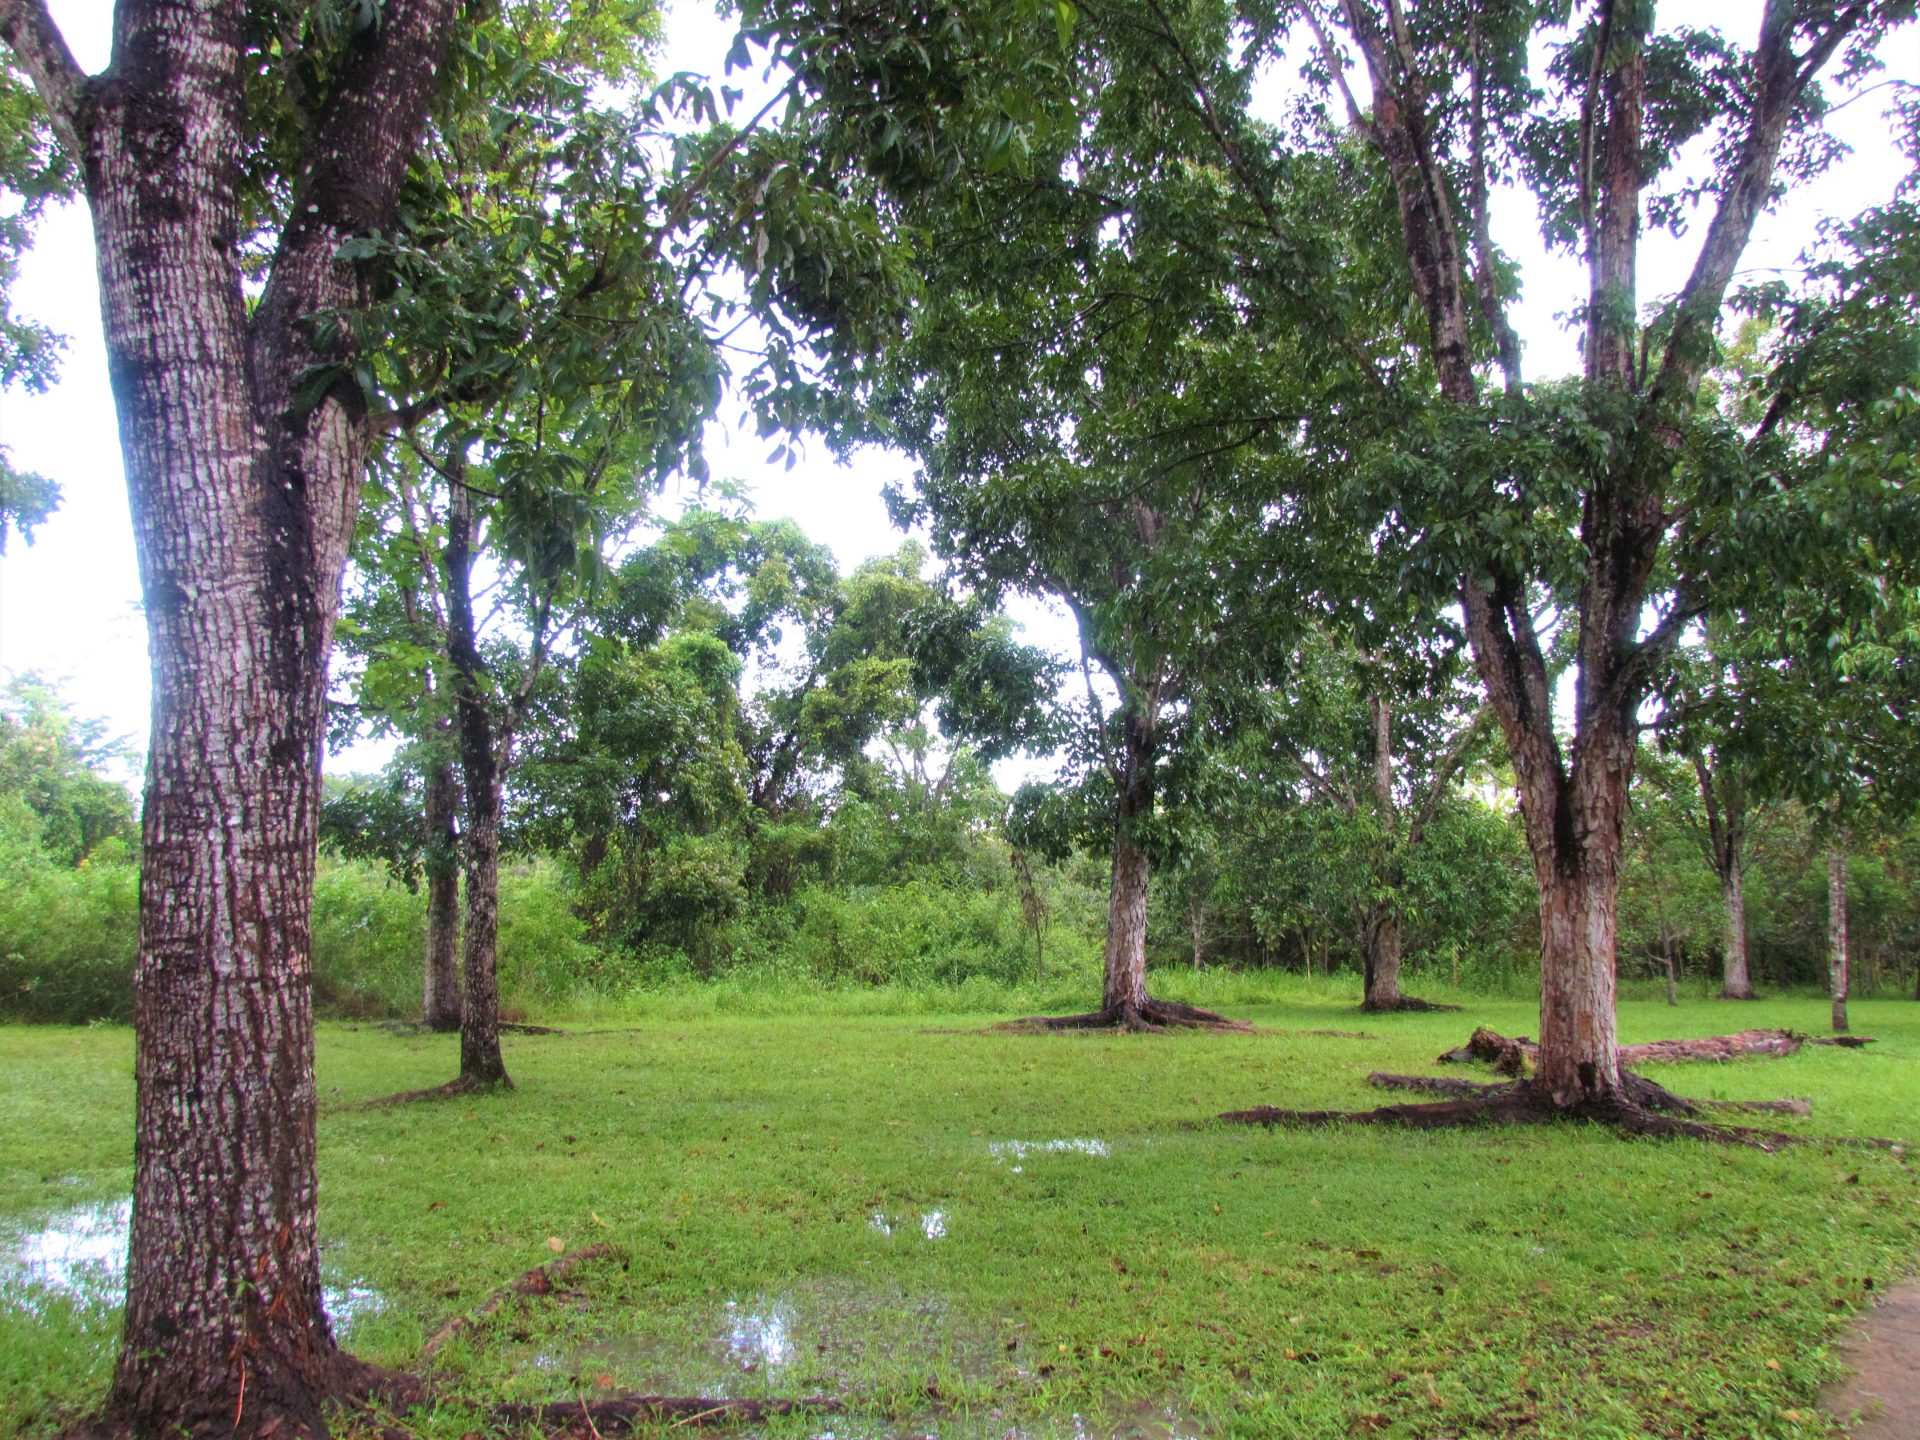 multiple mahogany trees in Belize